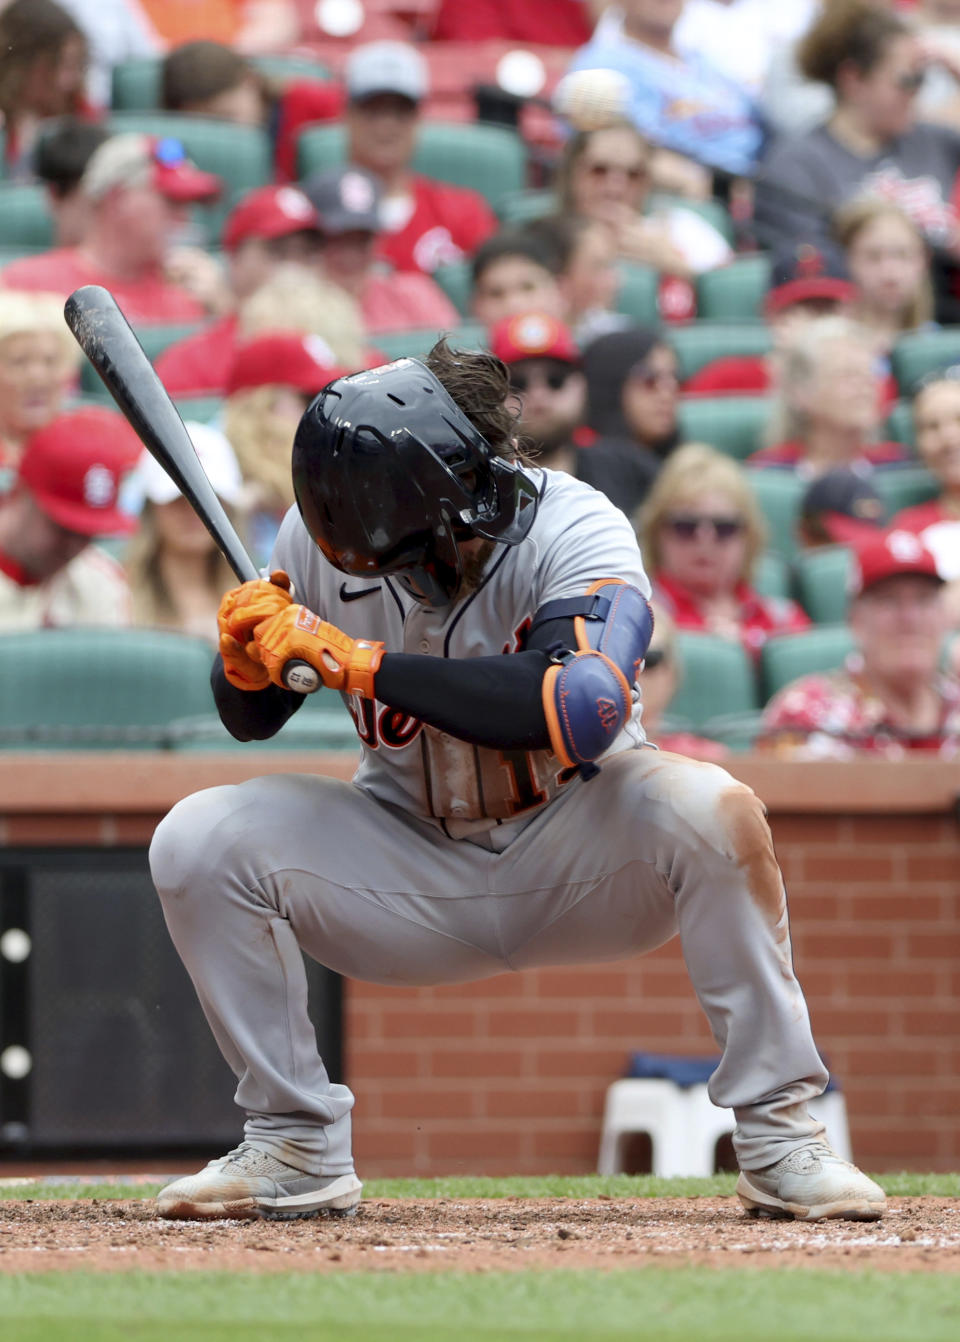 Detroit Tigers' Eric Haase loses his helmet as he ducks to avoid a pitch from St. Louis Cardinals' Drew VerHagen in the sixth inning of a baseball game, Saturday, May 6, 2023, in St. Louis. (AP Photo/Tom Gannam)